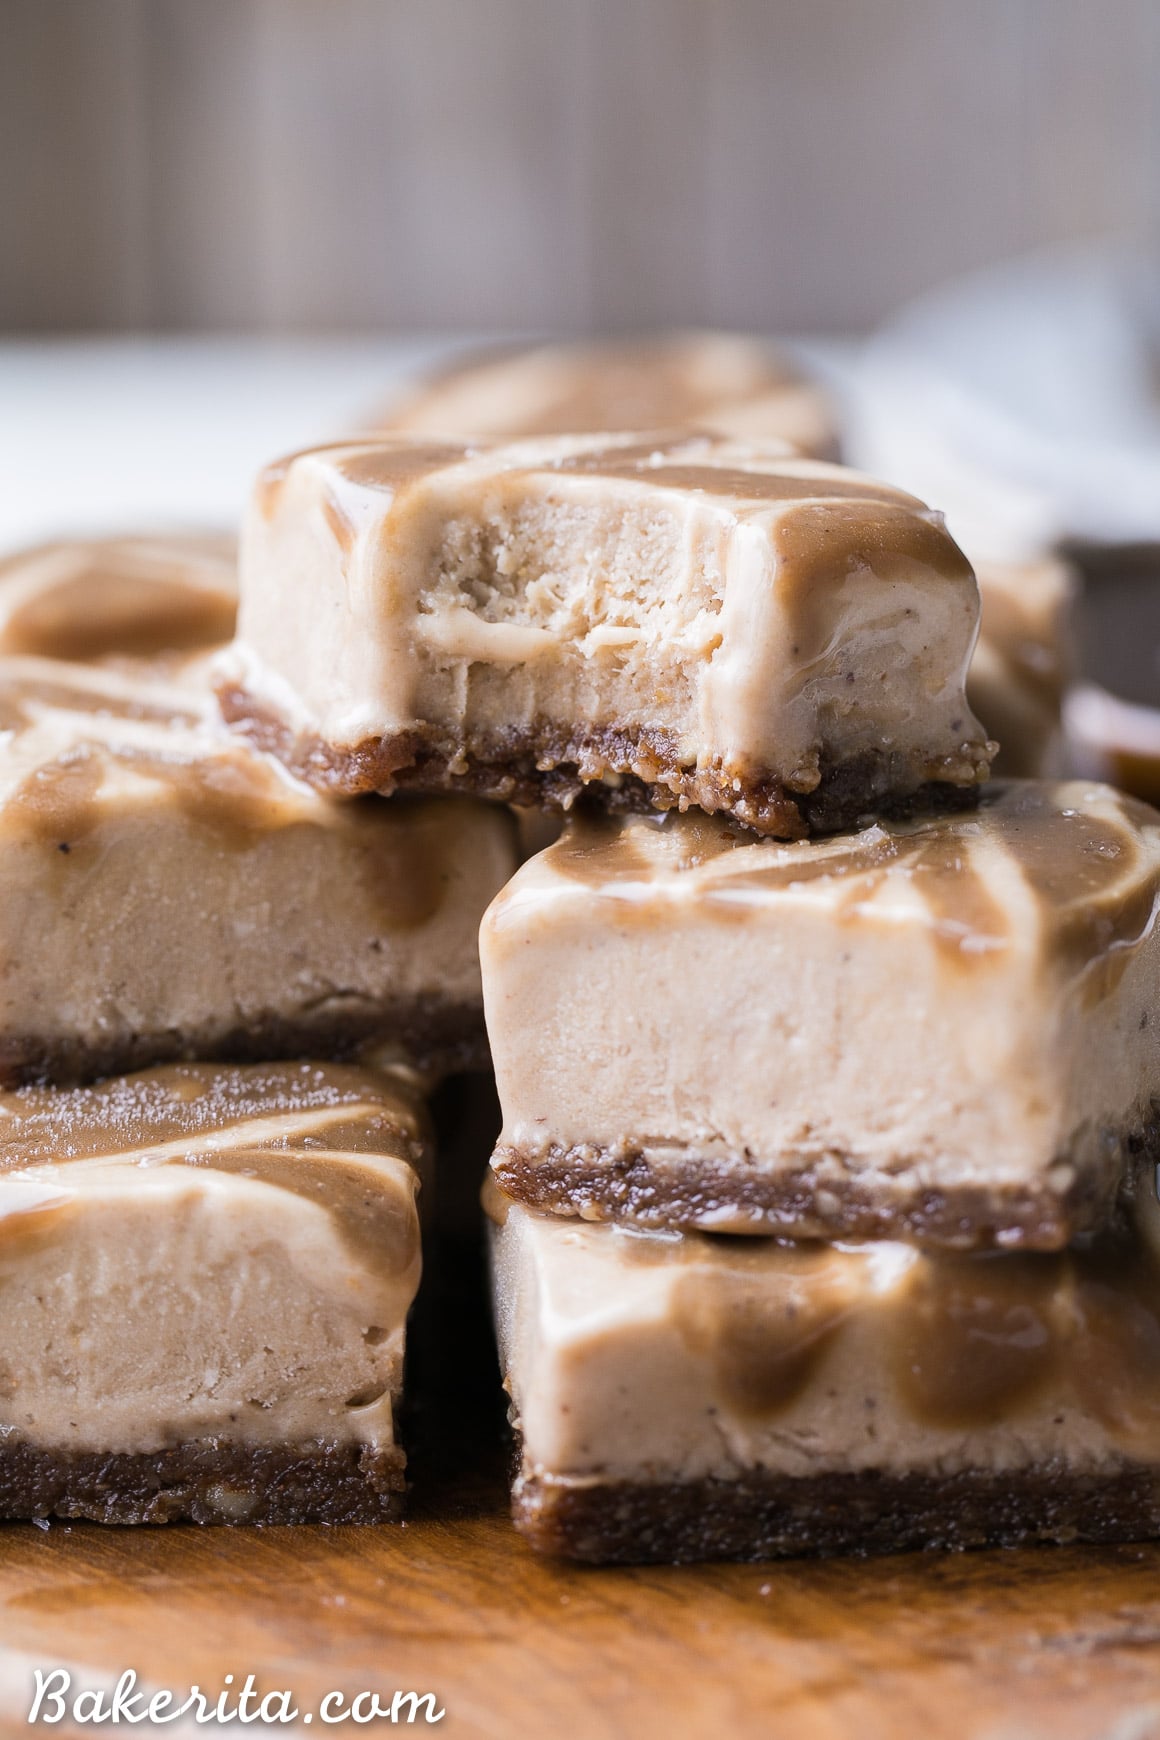 These Frozen Caramel Banana Bars are easy to make in a blender or food processor, and they're super creamy and refreshing. These gluten-free and paleo bars have a chewy pecan-date crust, topped with banana nice cream and a caramel swirl.